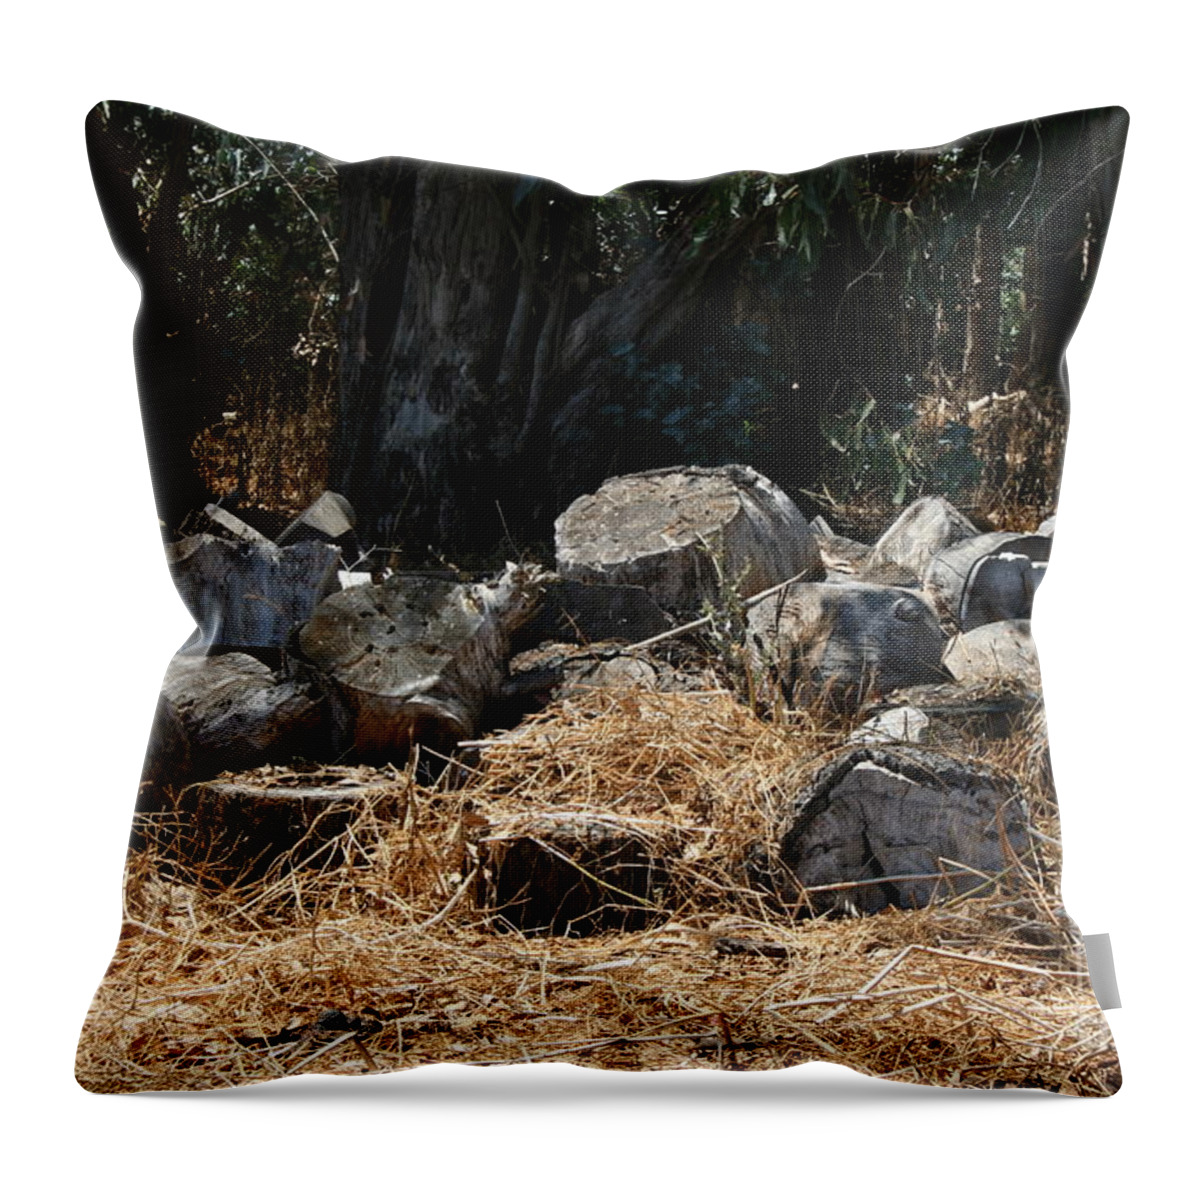  Throw Pillow featuring the photograph Untitled by Cynthia Marcopulos